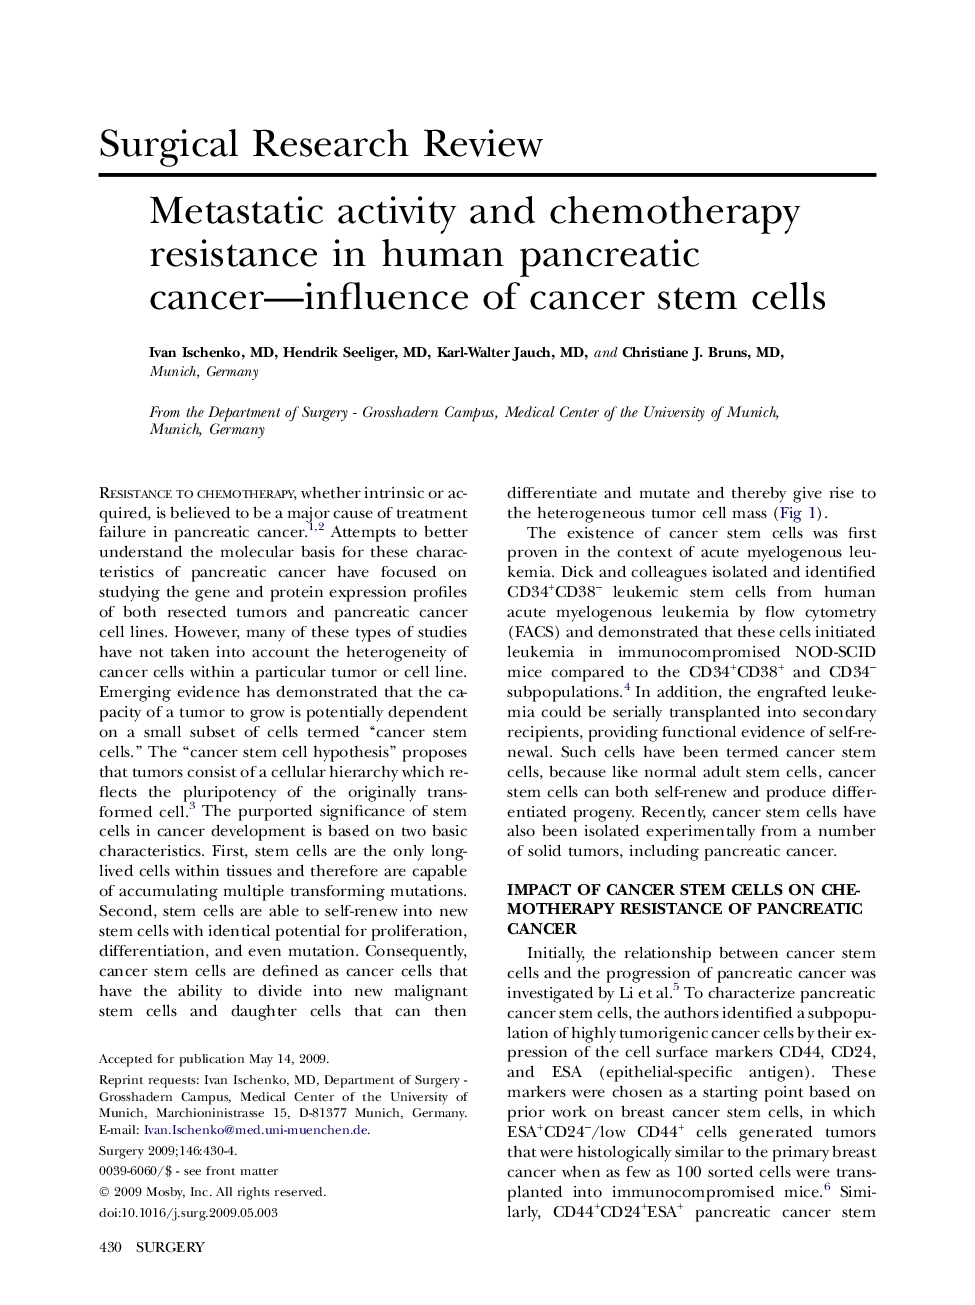 Metastatic activity and chemotherapy resistance in human pancreatic cancer-influence of cancer stem cells